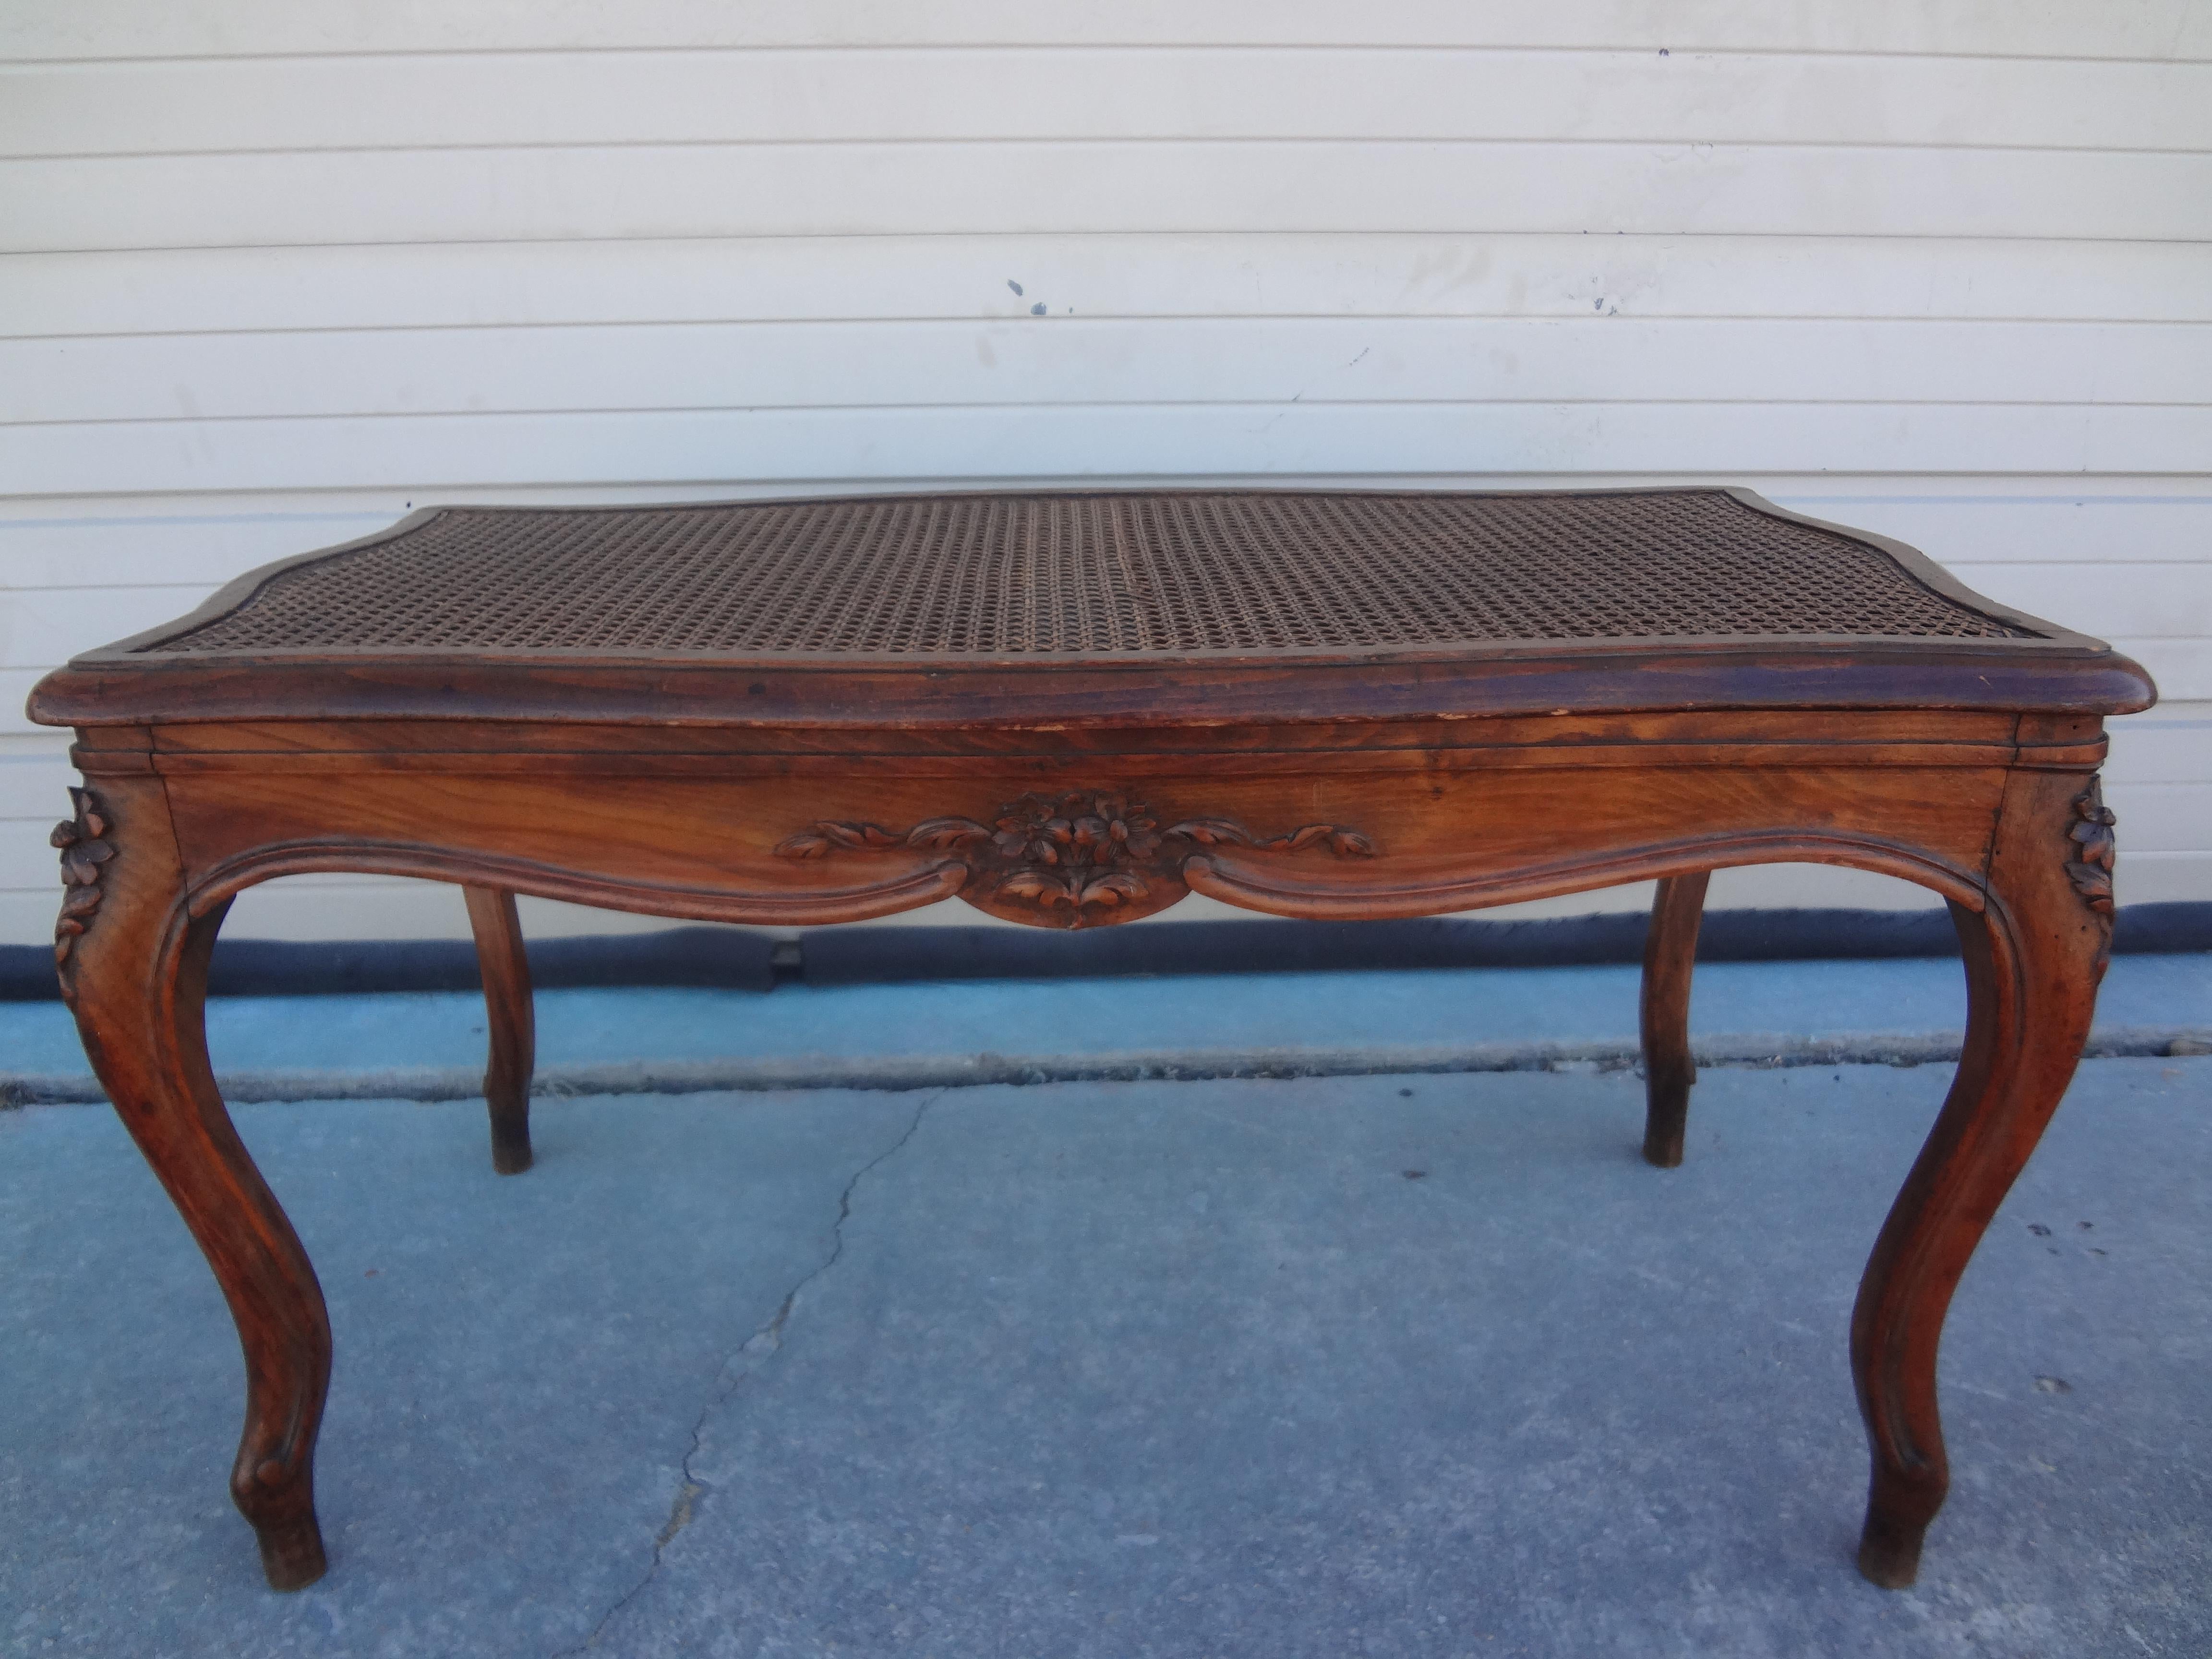 French Louis XV style walnut cane bench. This stunning French bench is a light shade of walnut and the cane seat is in very good tight condition. Our versatile French bench would work well in an entrance hall, living area, bedroom or dressing area.